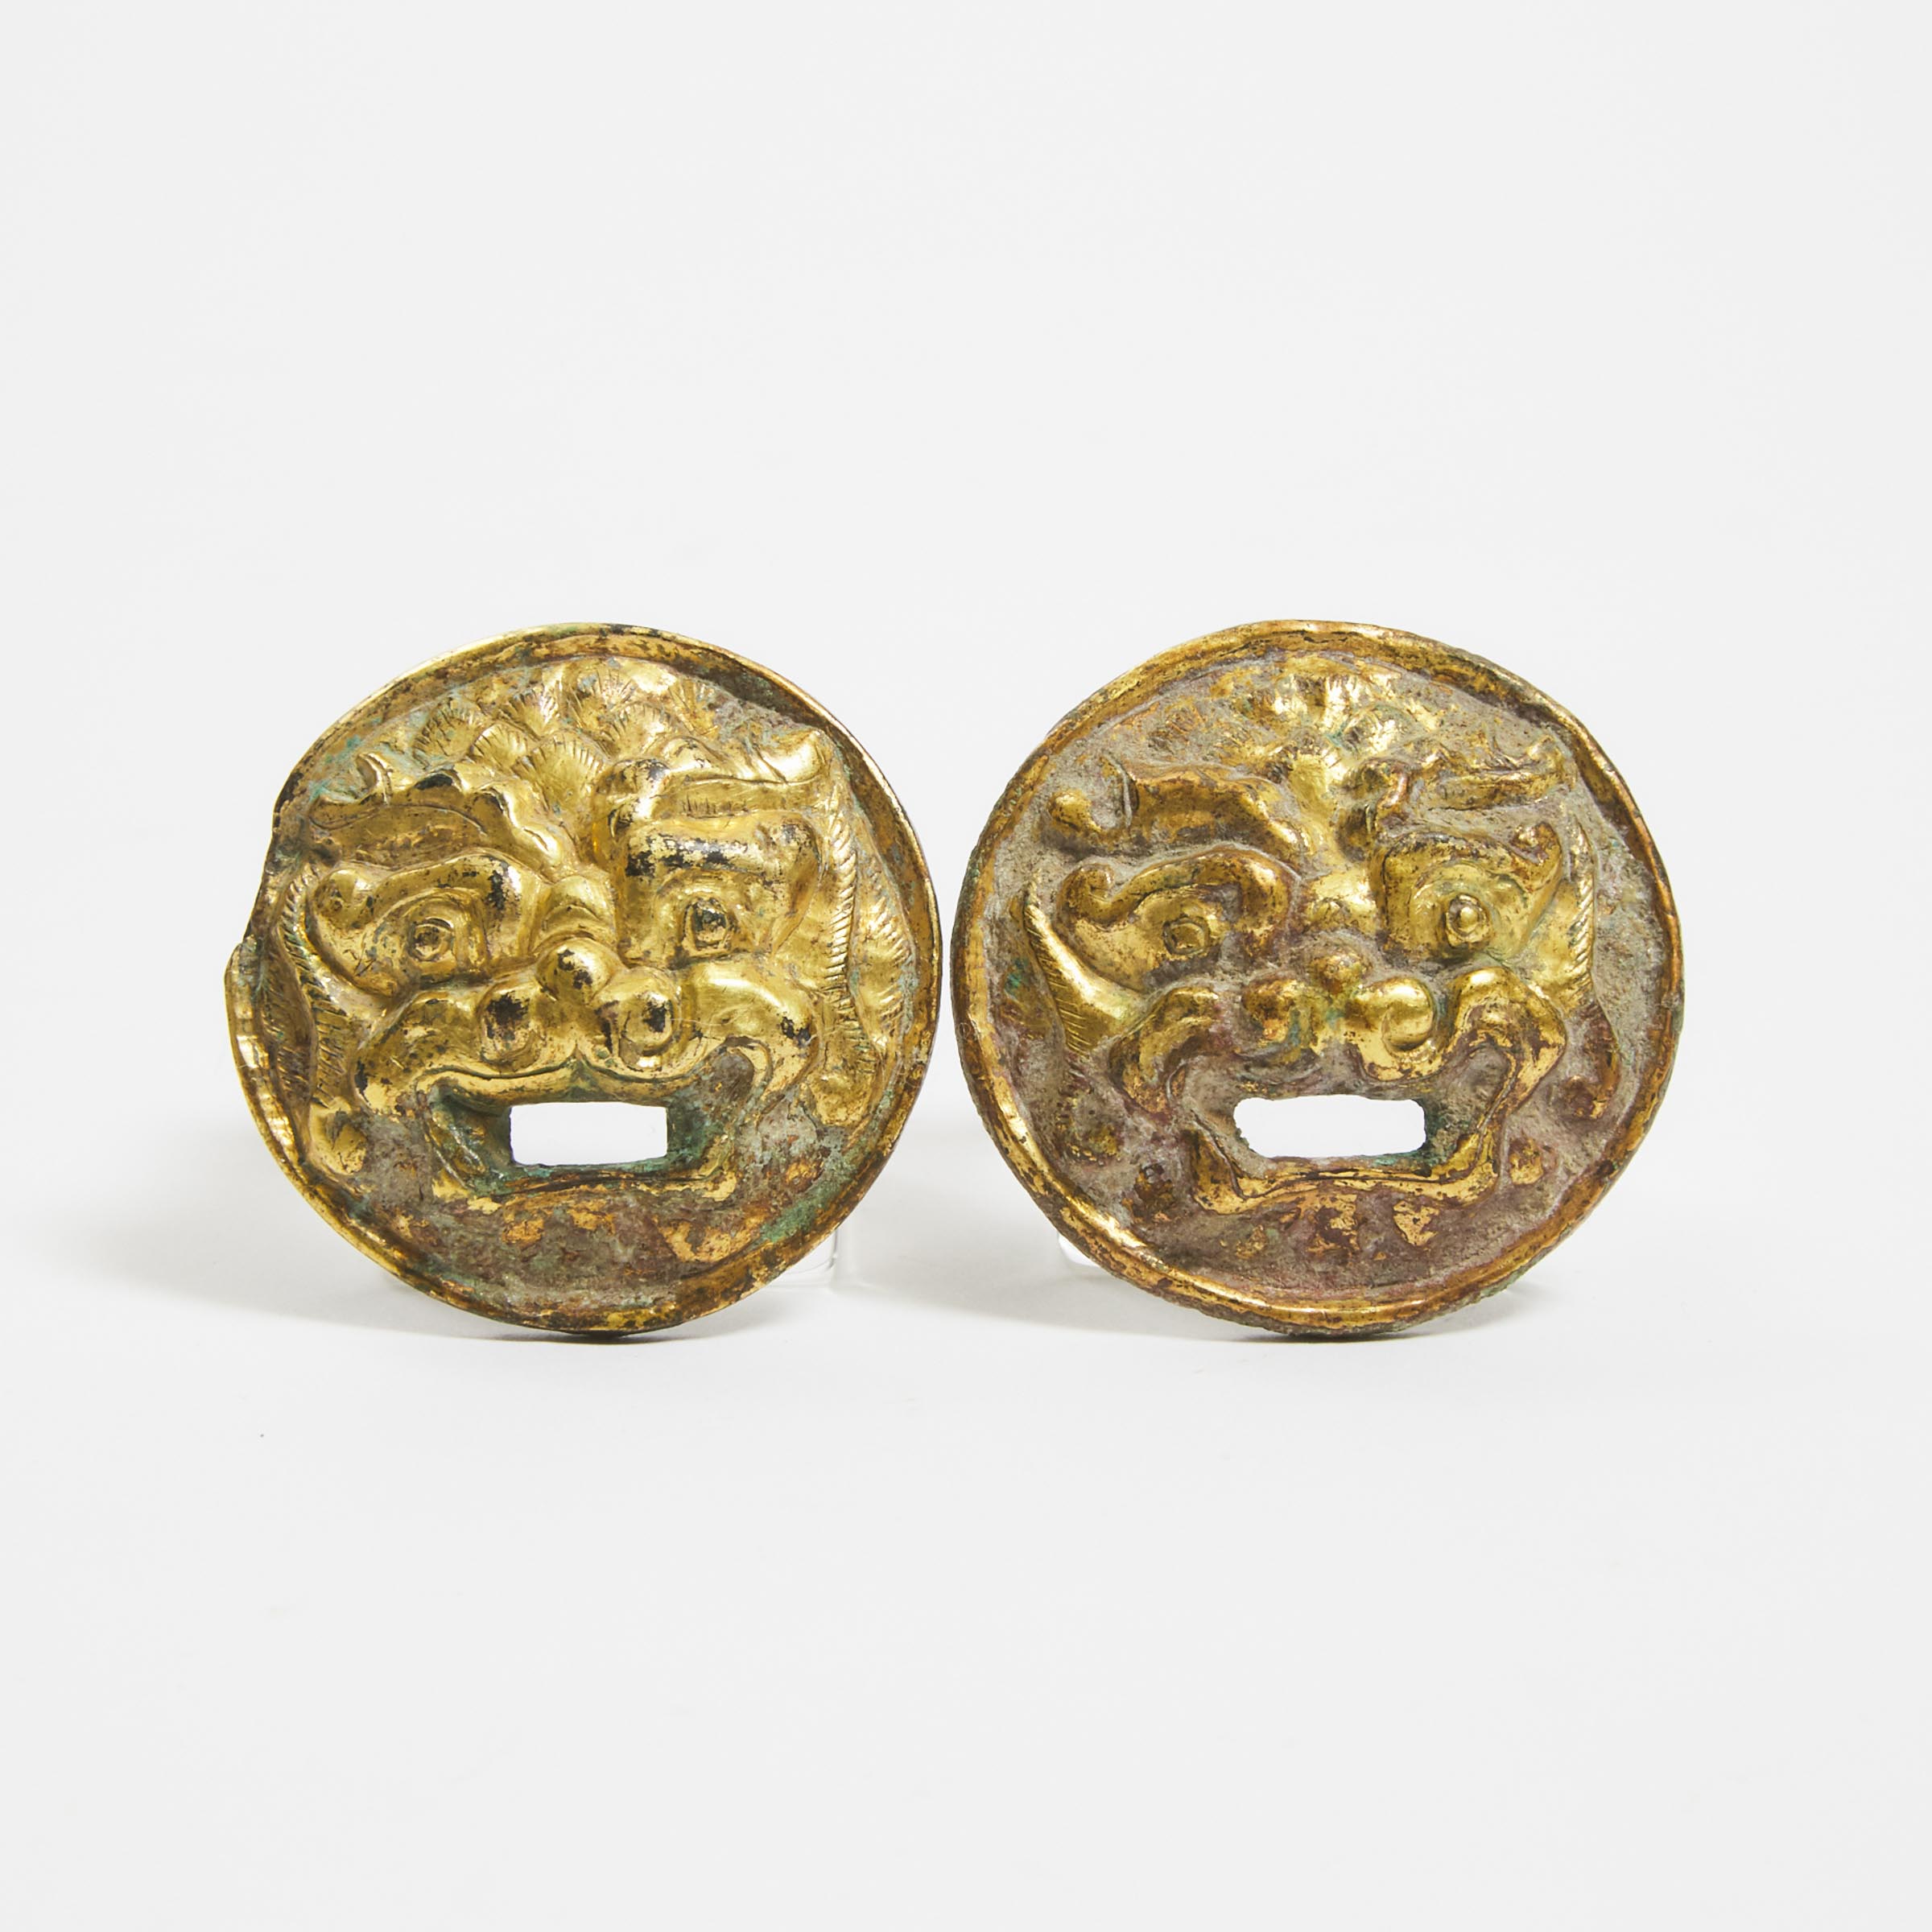 A Pair of Gilt Bronze 'Mythical Beast' Roundels, Tang Dynasty (AD 618-907)